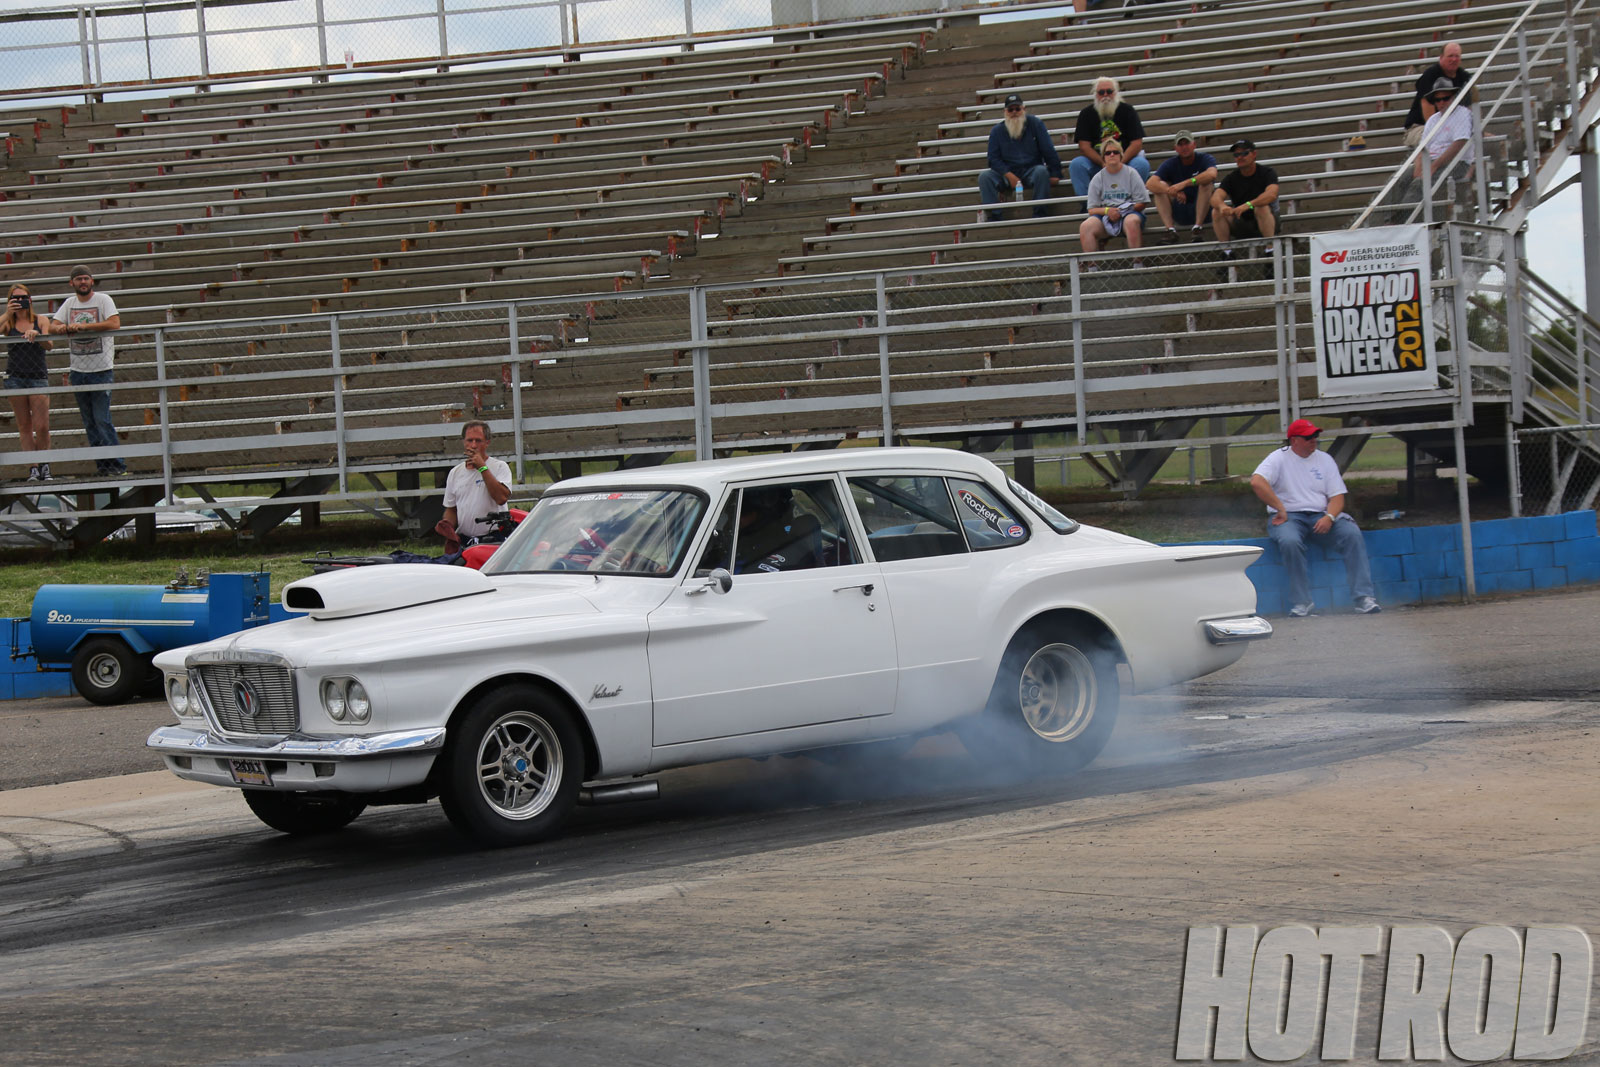 Attached picture 7433155-drag-week-2012-wednesday-gallery-6220.jpg